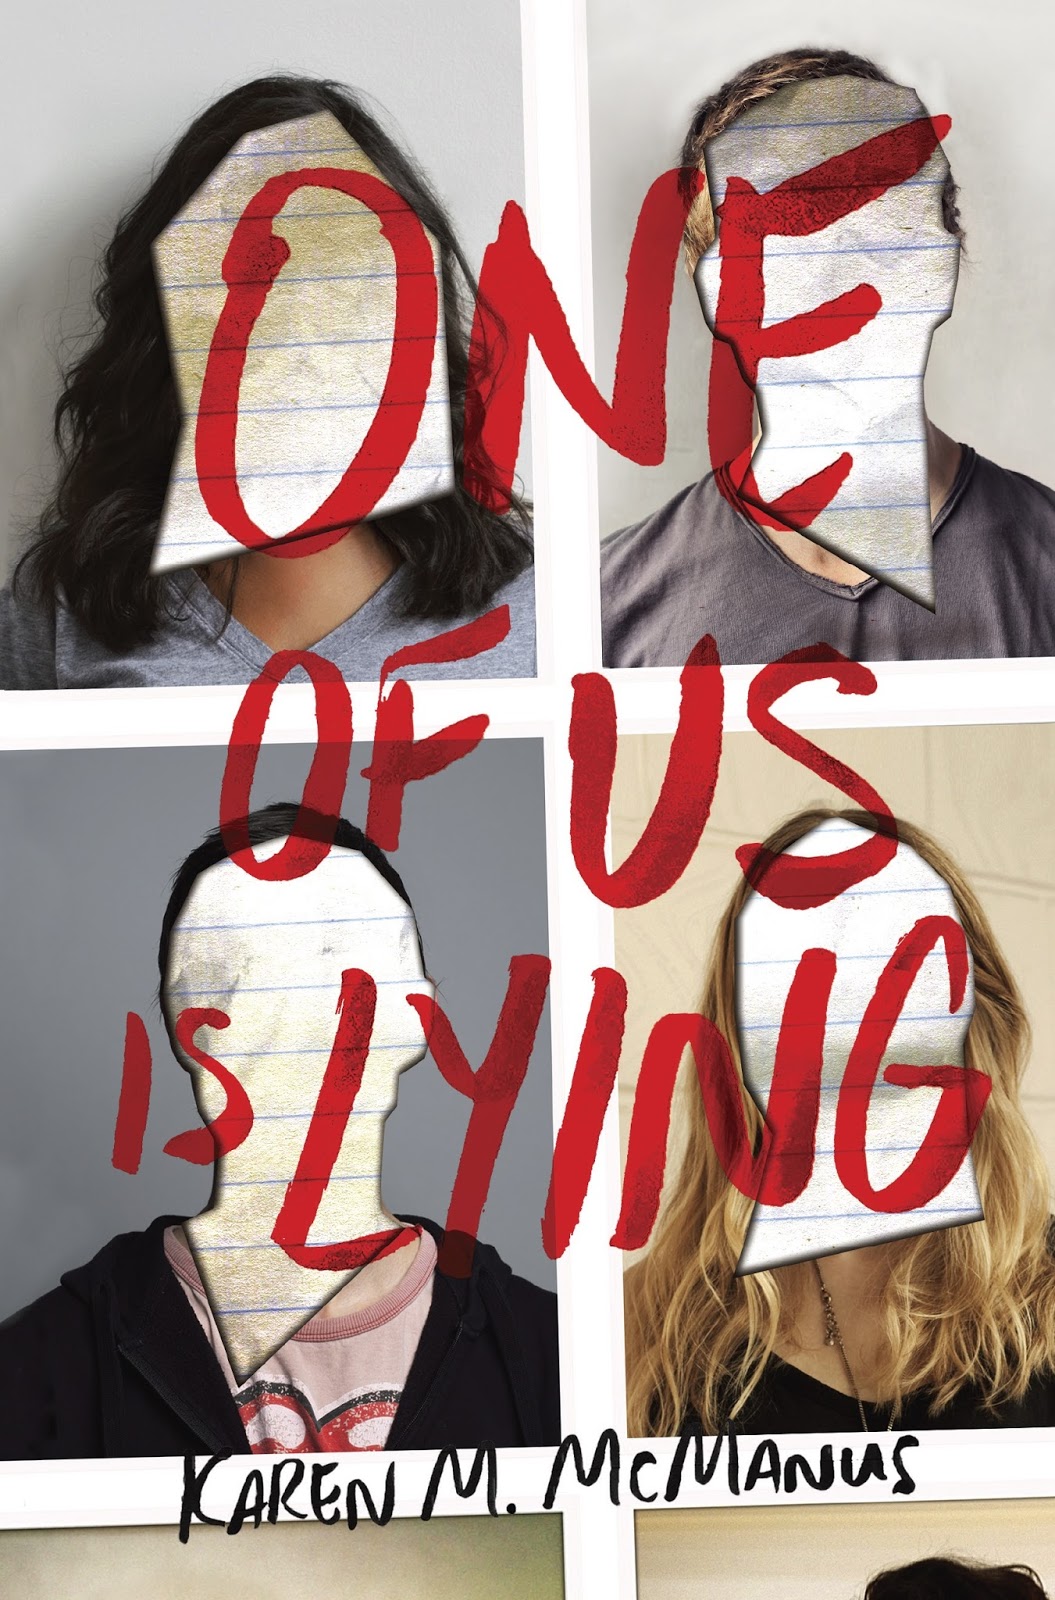 book report on one of us is lying